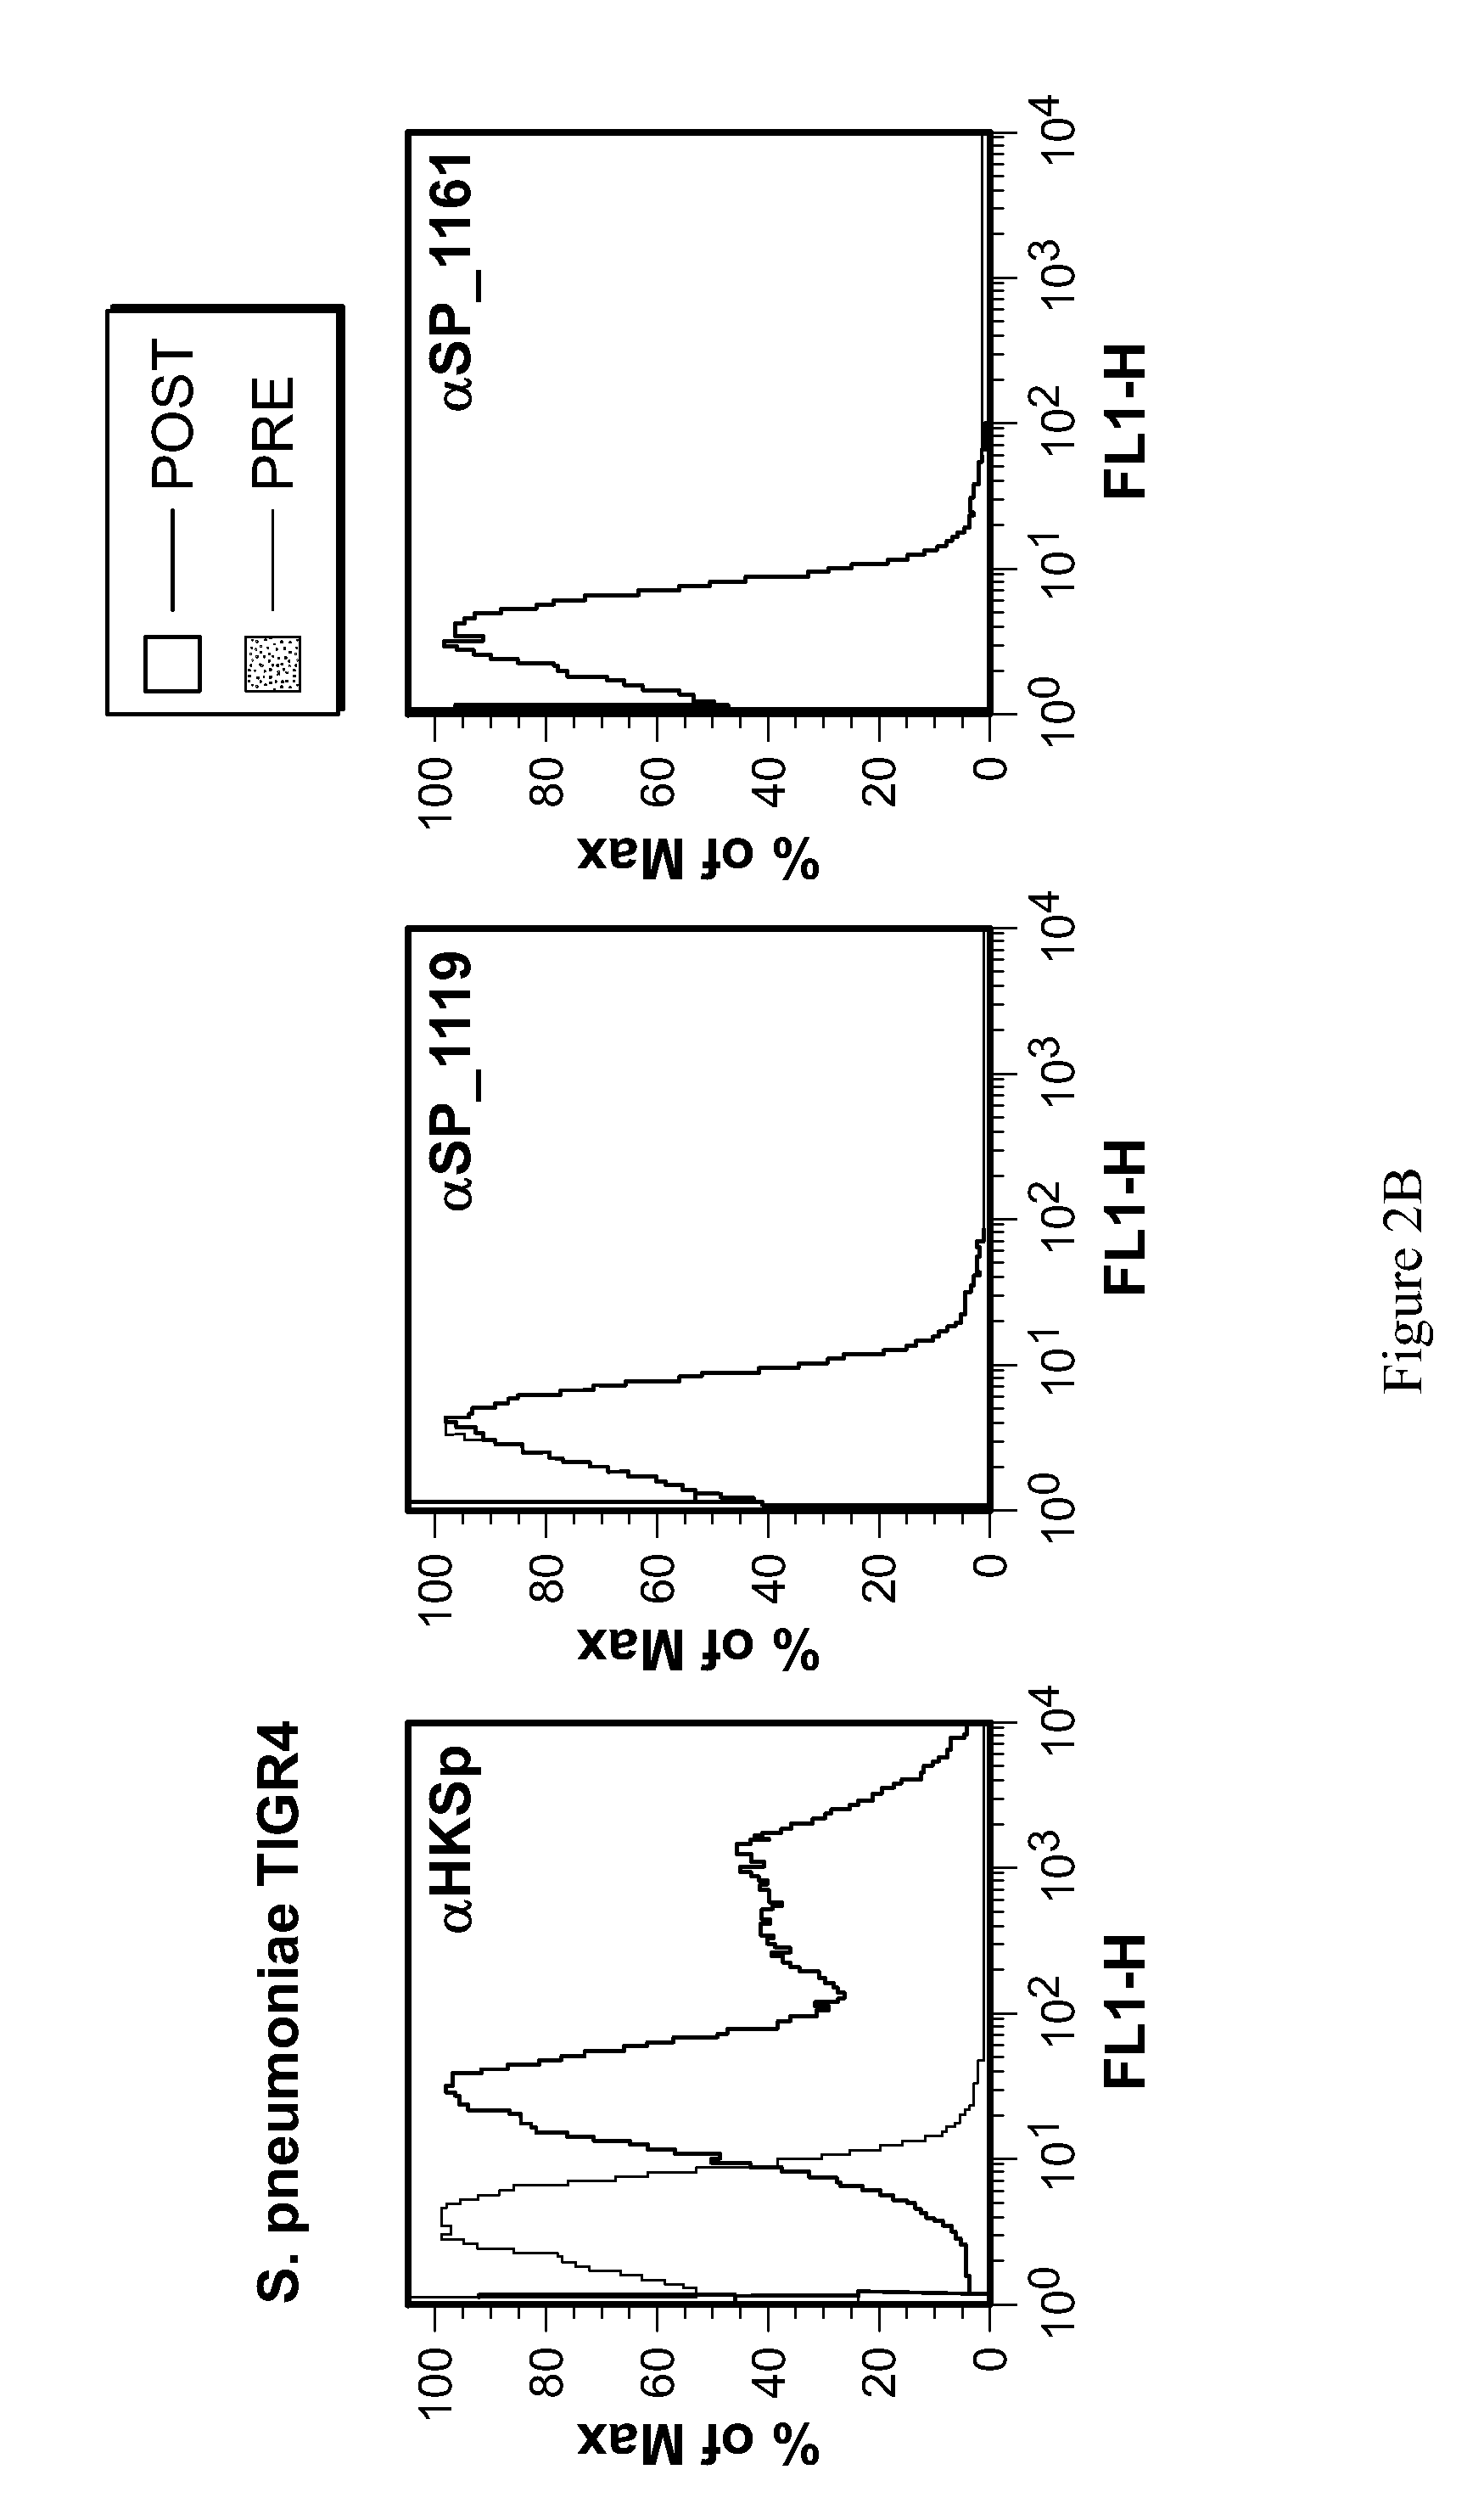 Methods for preventing and treating staphylococcus aureus colonization, infection, and disease